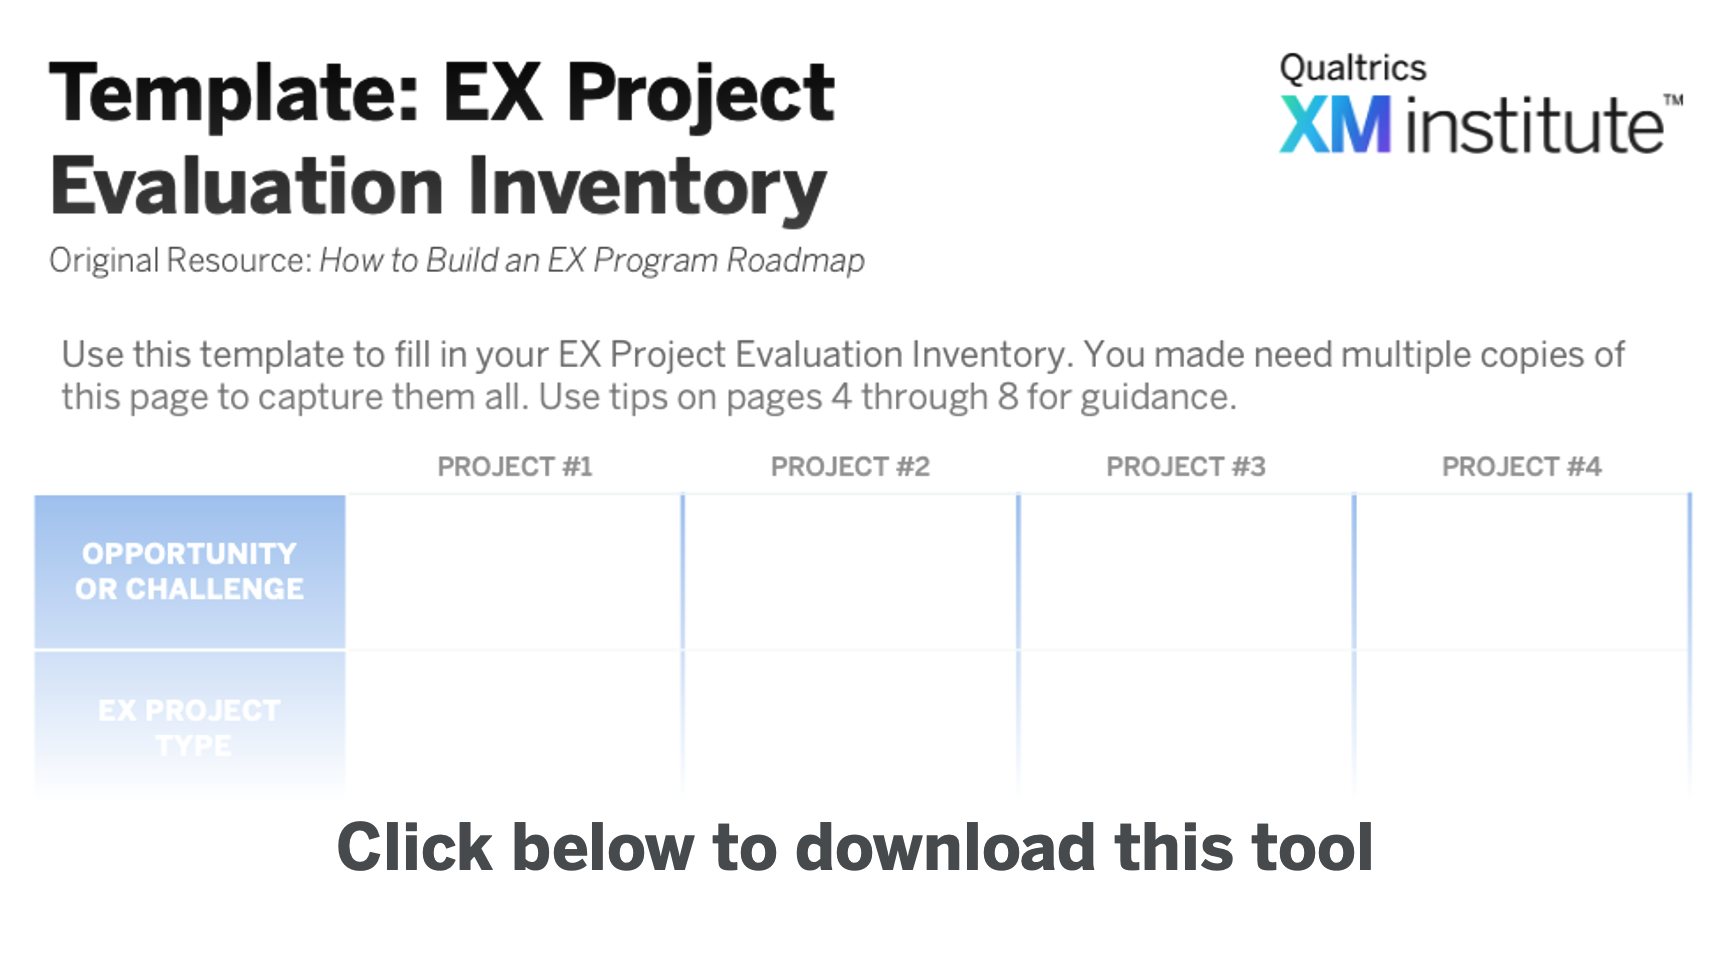 Download Image - EX Project Evaluation Inventory